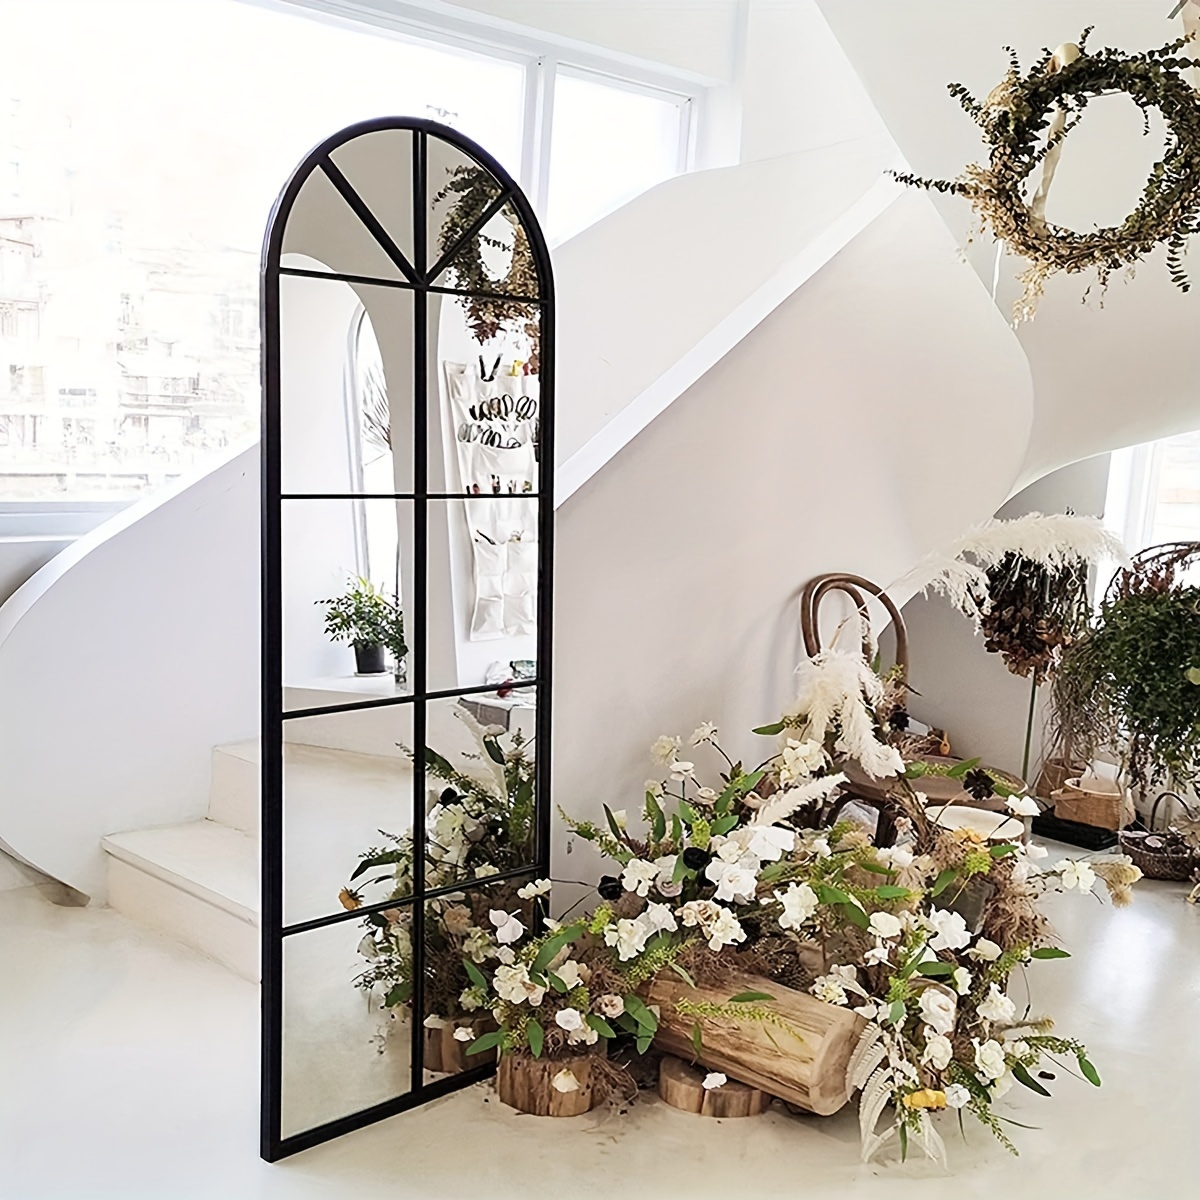 

Tinytimes Large Window Garden Mirror, Arched Indoor Outdoor Full Length Wall Mirror, Metal Frame, Home Décor, Long Mirror, Wall Mounted Or Leaning, No Stand, Black